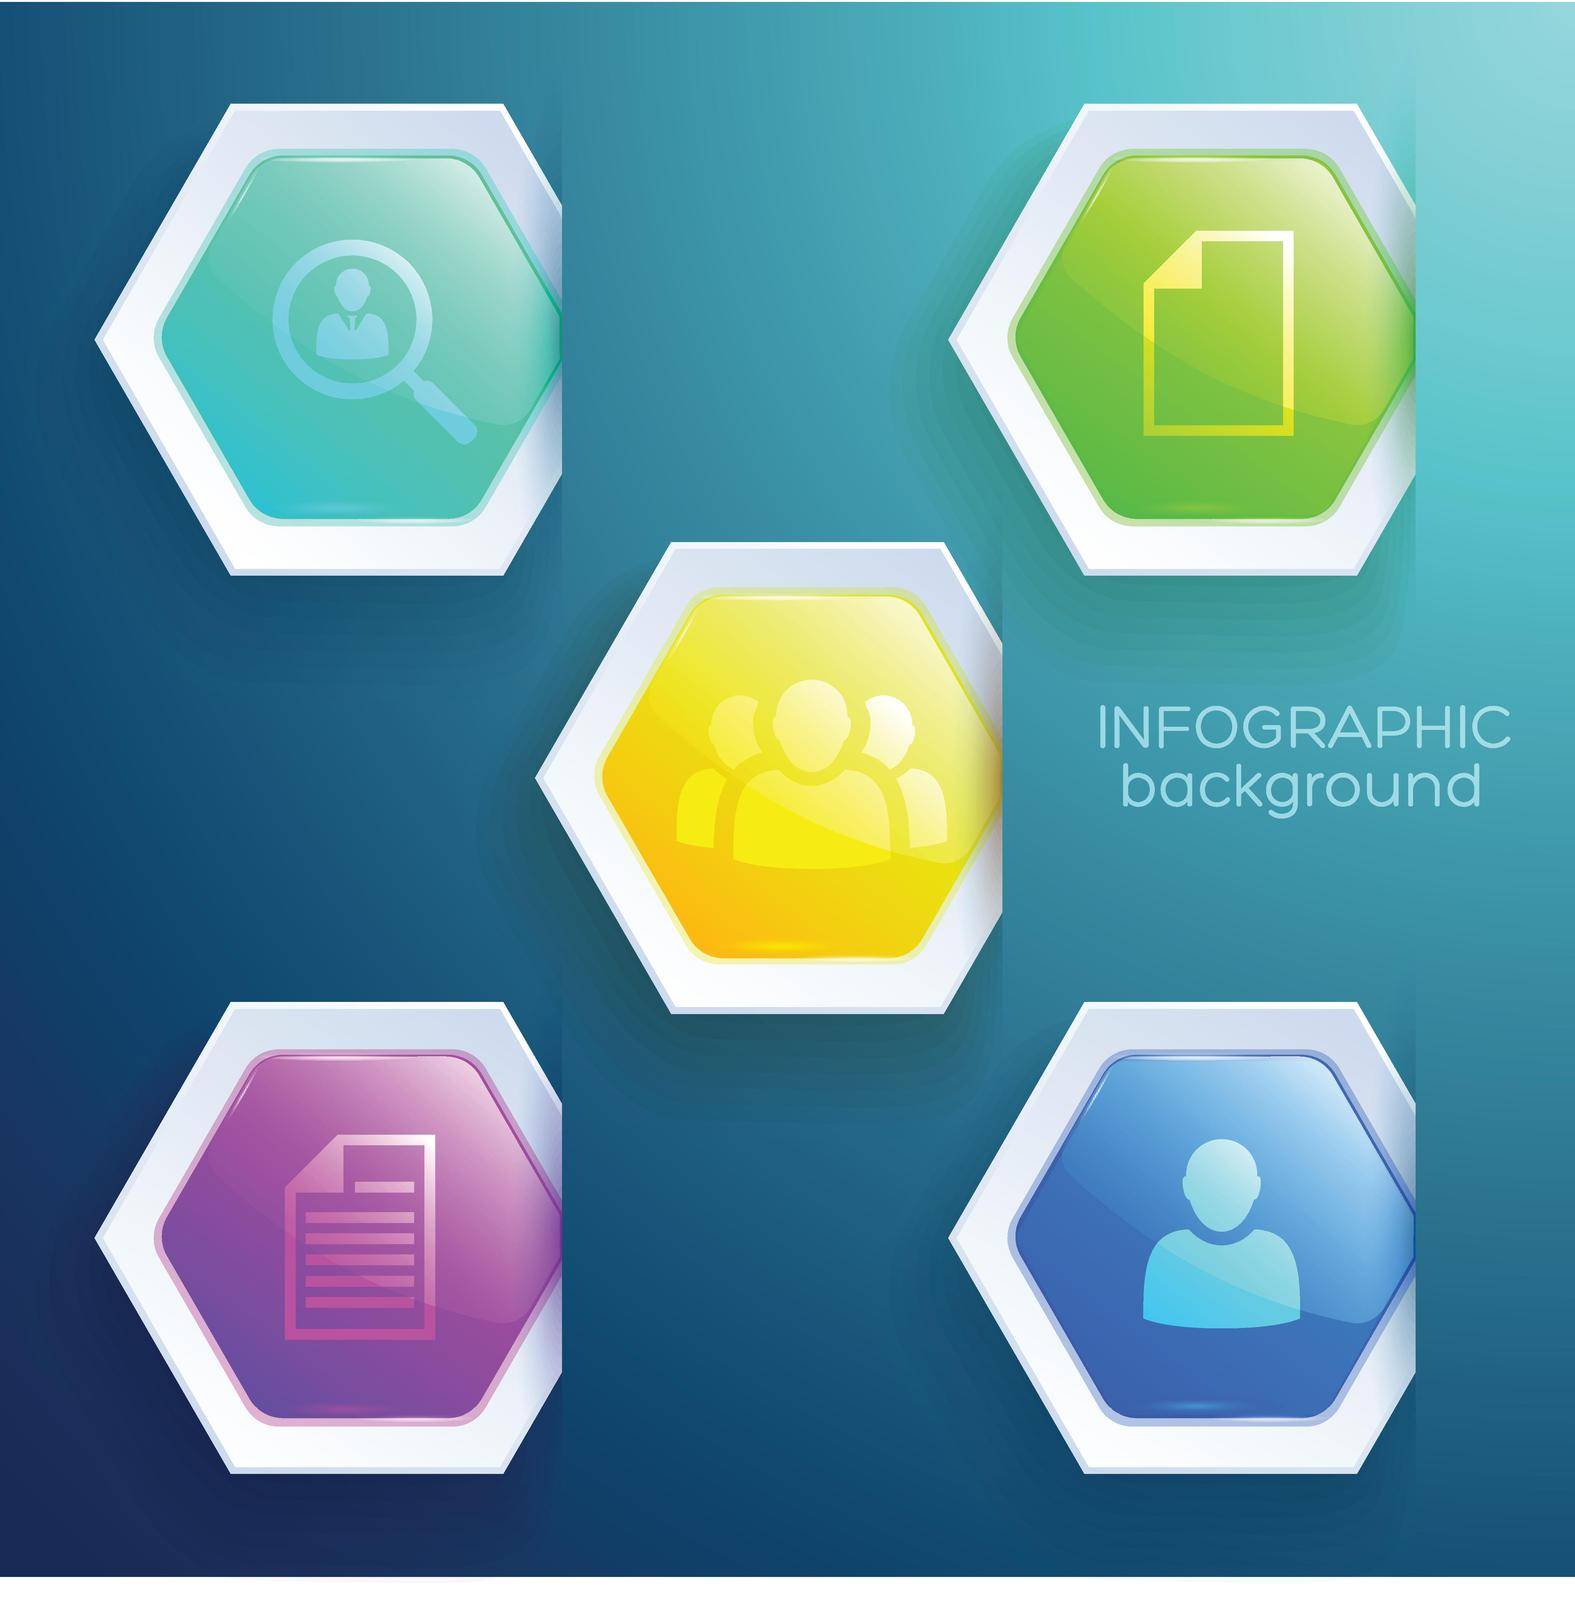 Business web infographic concept with glossy colorful hexagons and icons on light background vector illustration